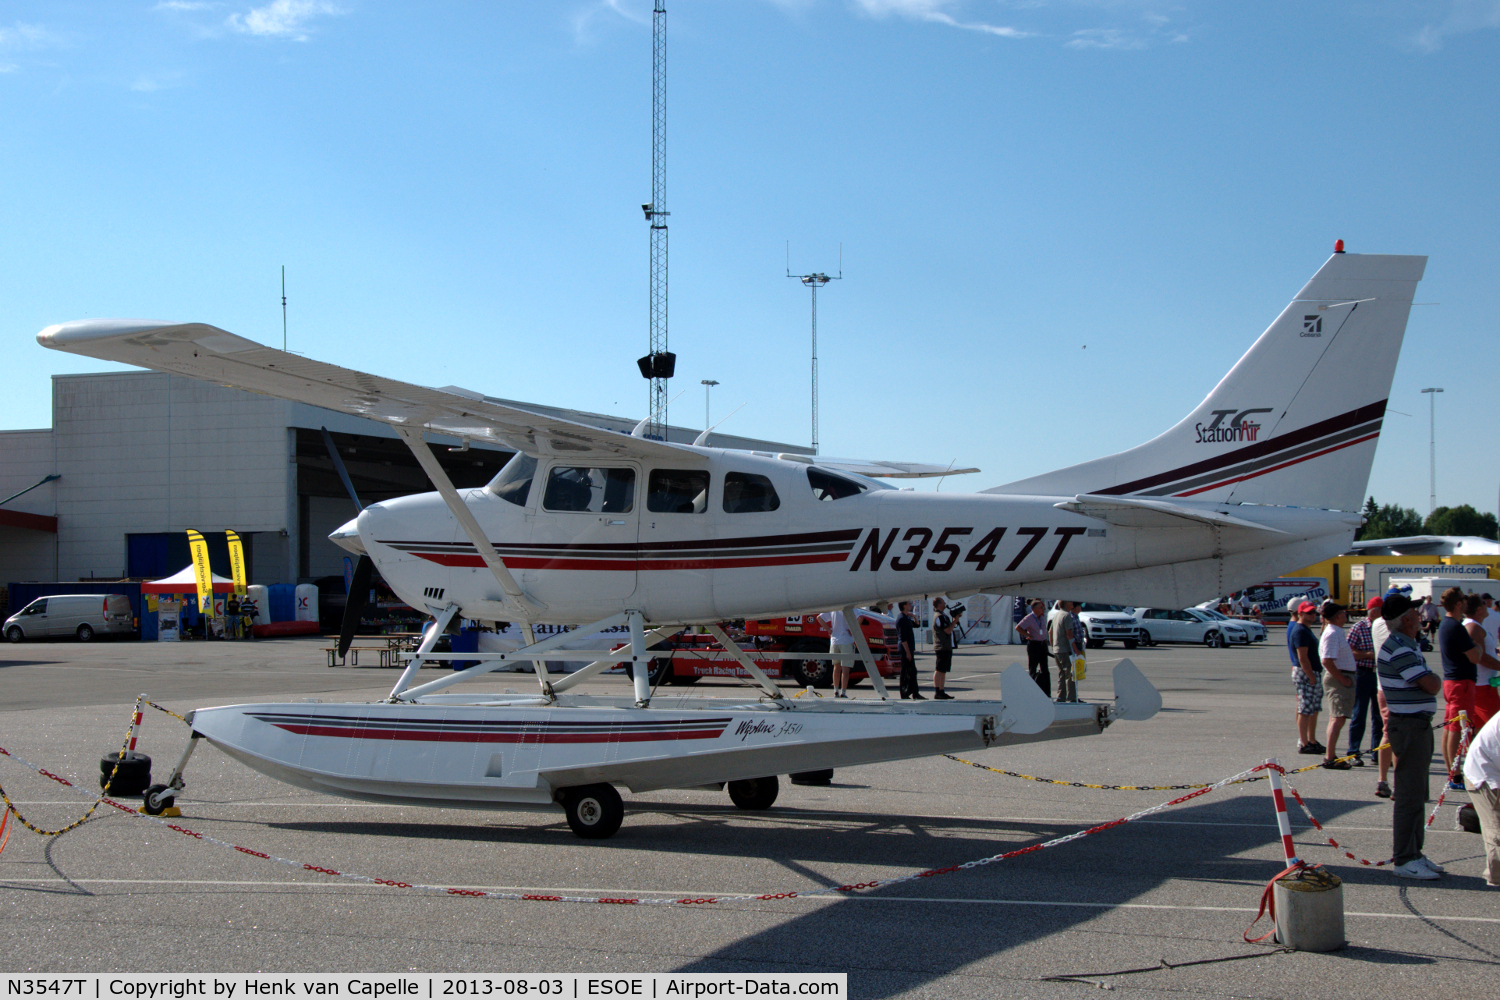 N3547T, 2001 Cessna T206H Turbo Stationair C/N T20608322, Cessna T206H parked at Örebro airport, Sweden. It has now been equipped with Wipline floats.